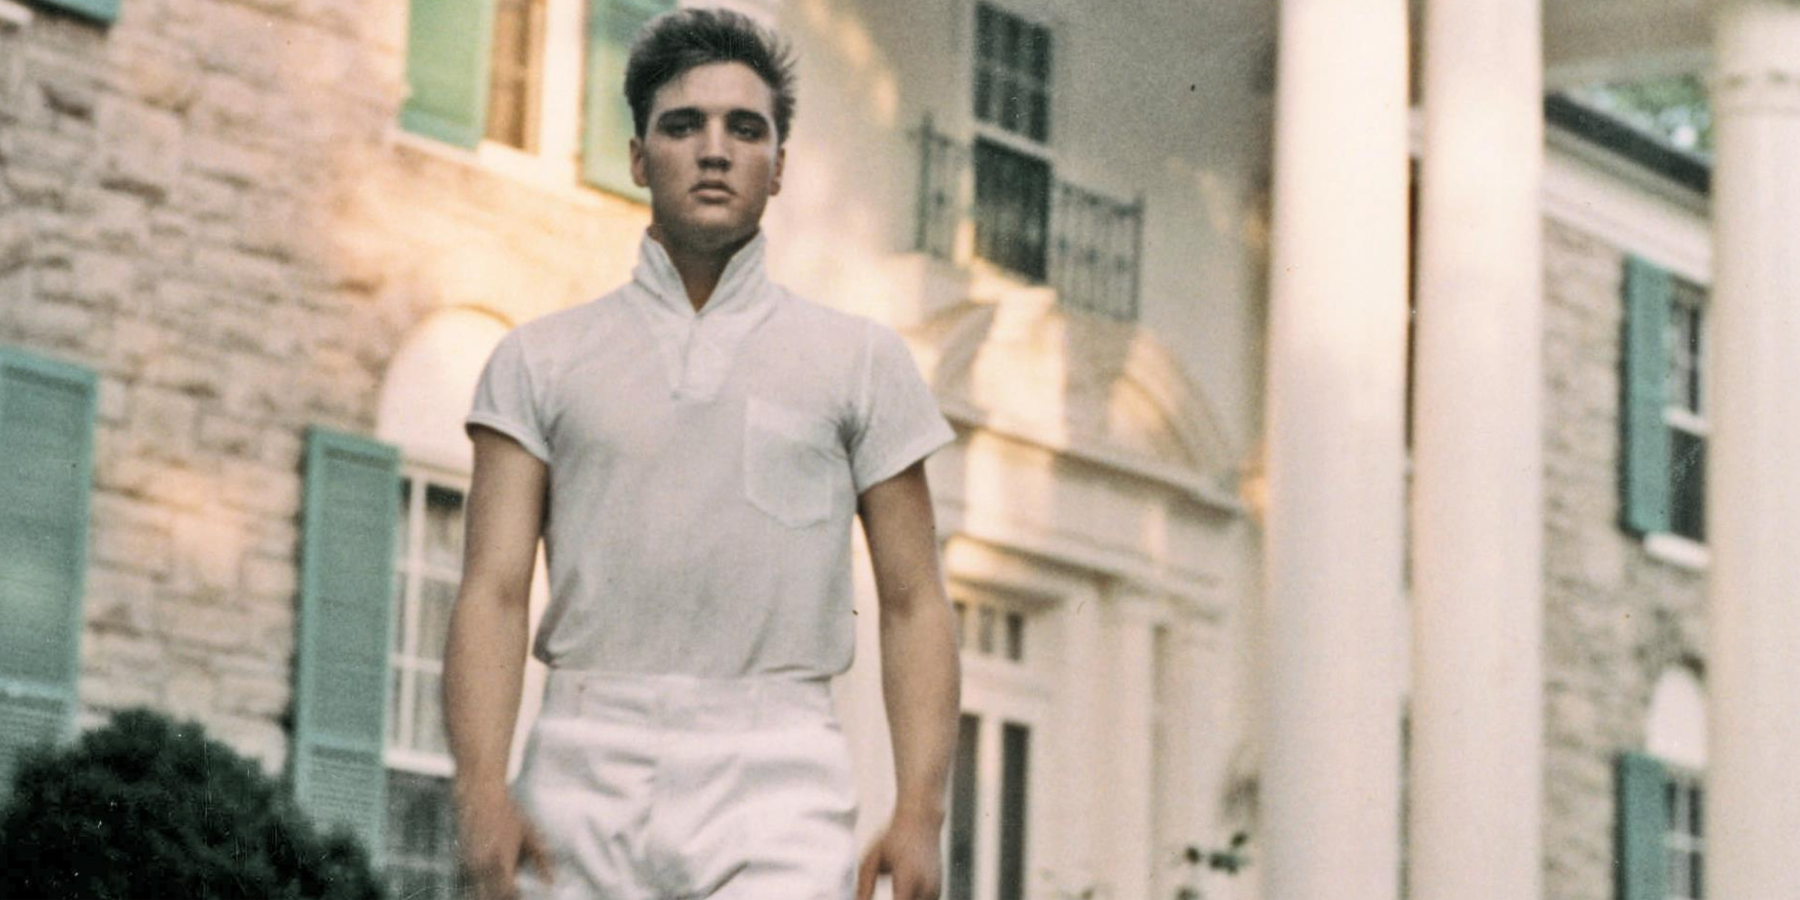 Elvis Presley poses in front of Graceland in a color photograph.